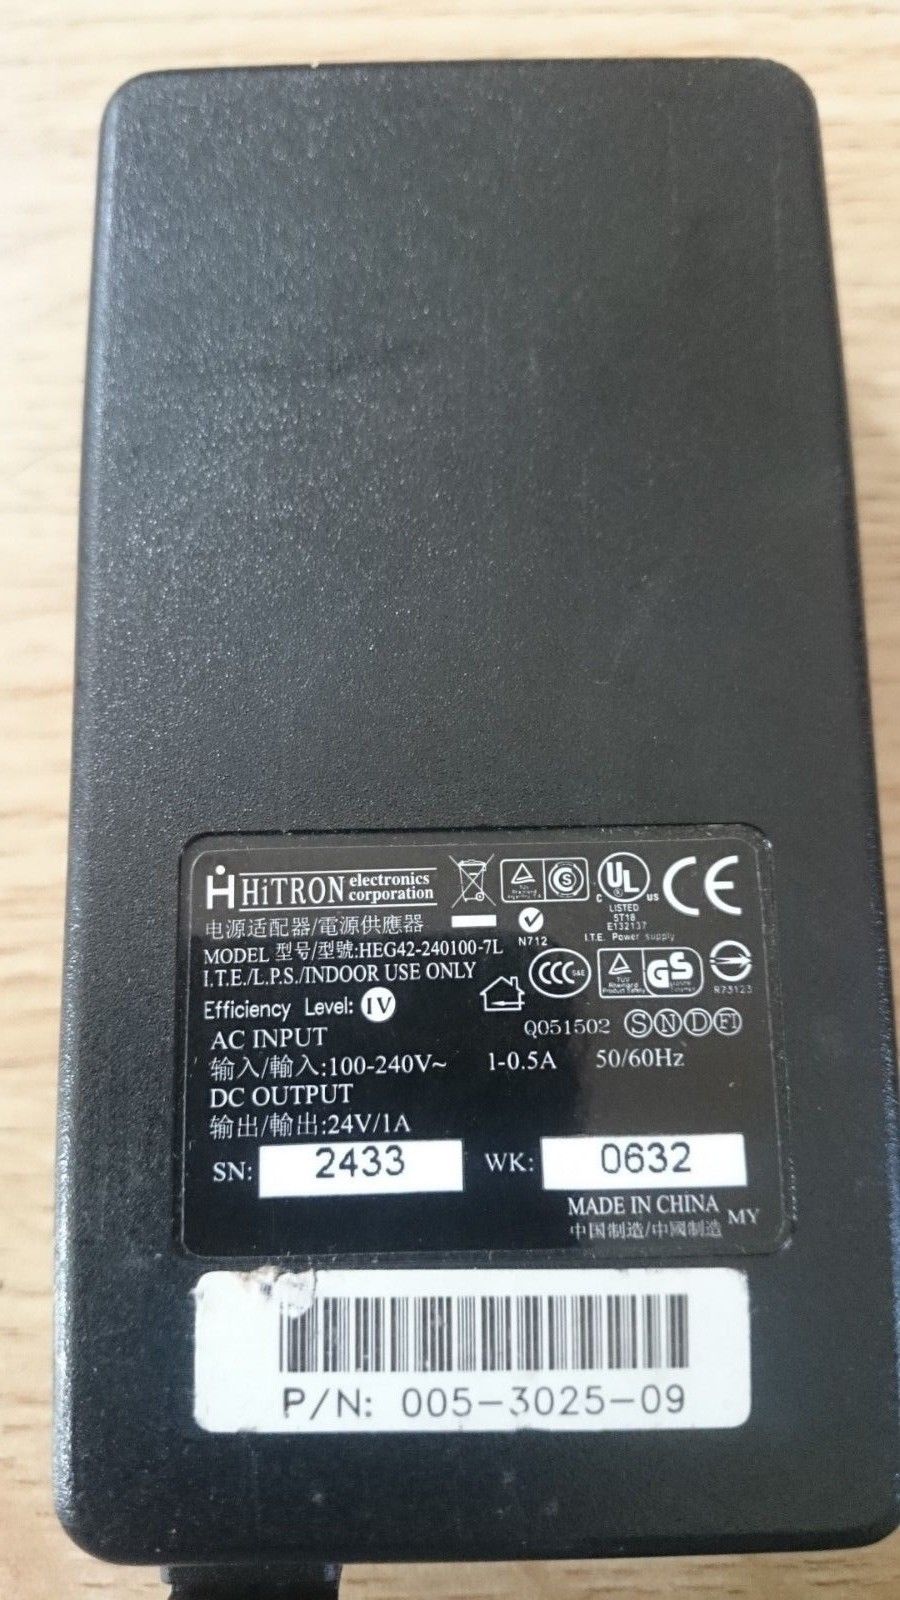 New Hitron 24V 1A HEG42-240100-7L Power Supply AC Adapter Charger